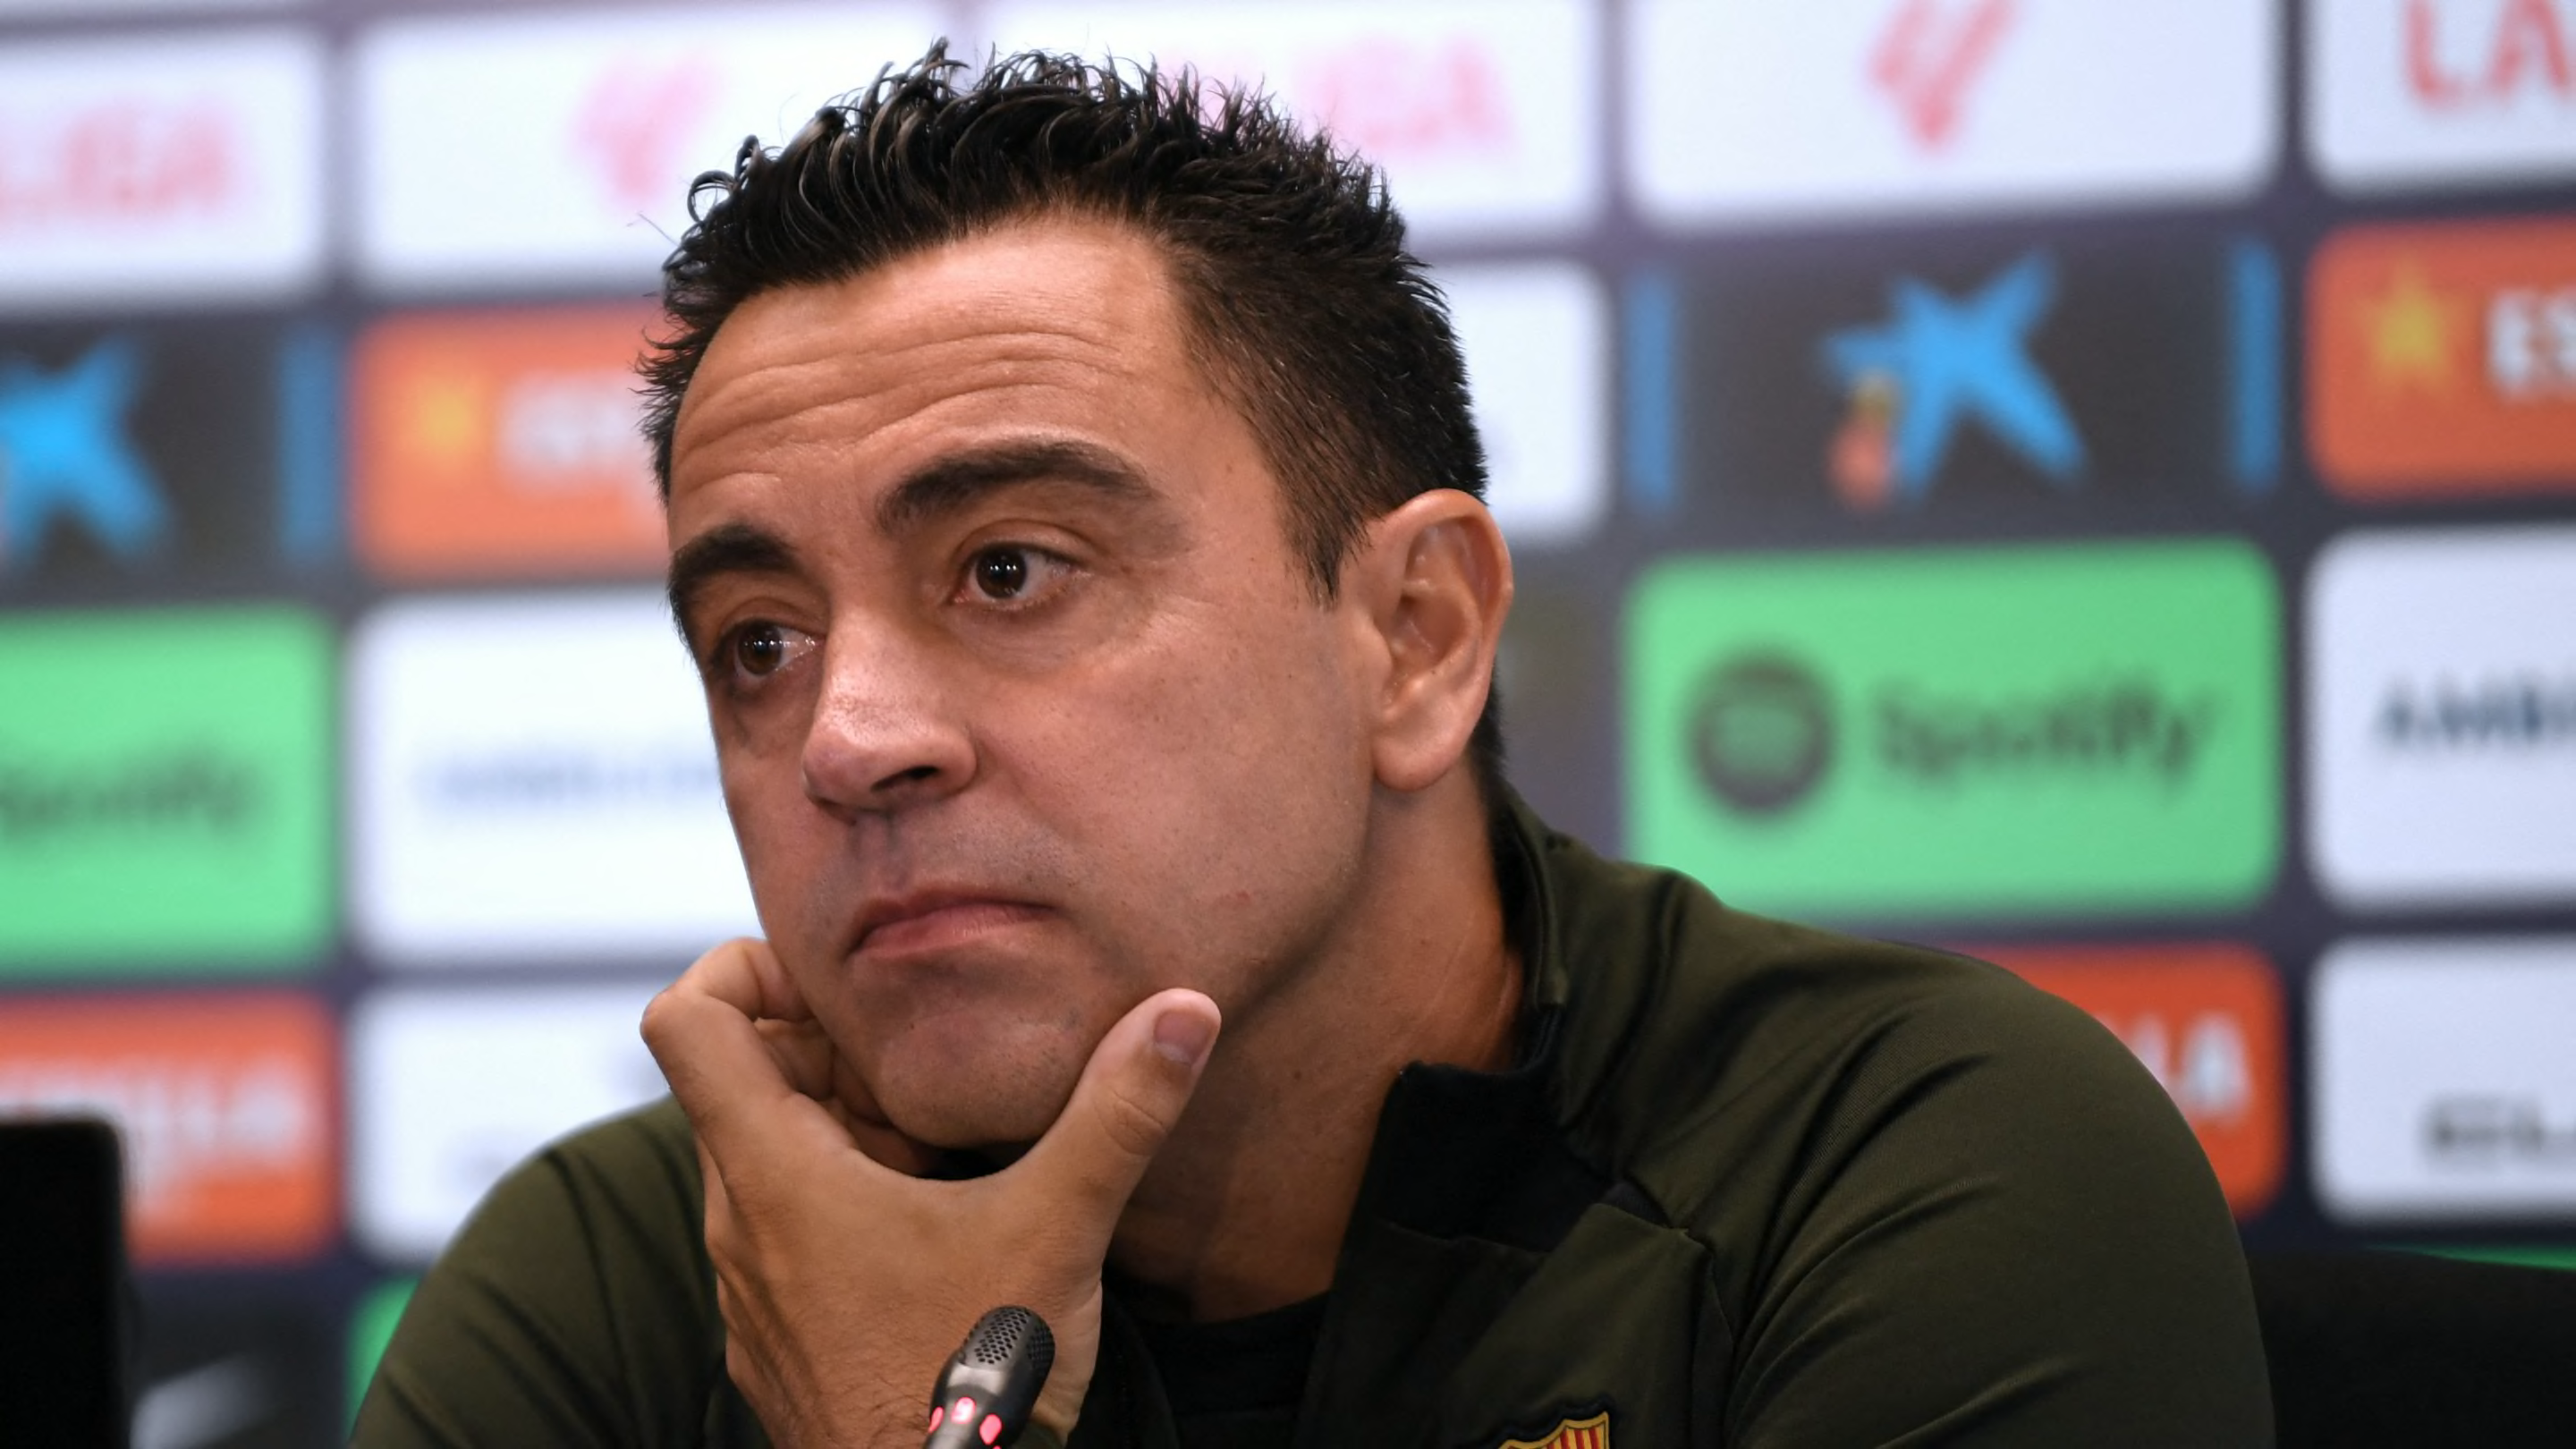 'Barca is the club of my life' - Xavi open on return to Camp Nou